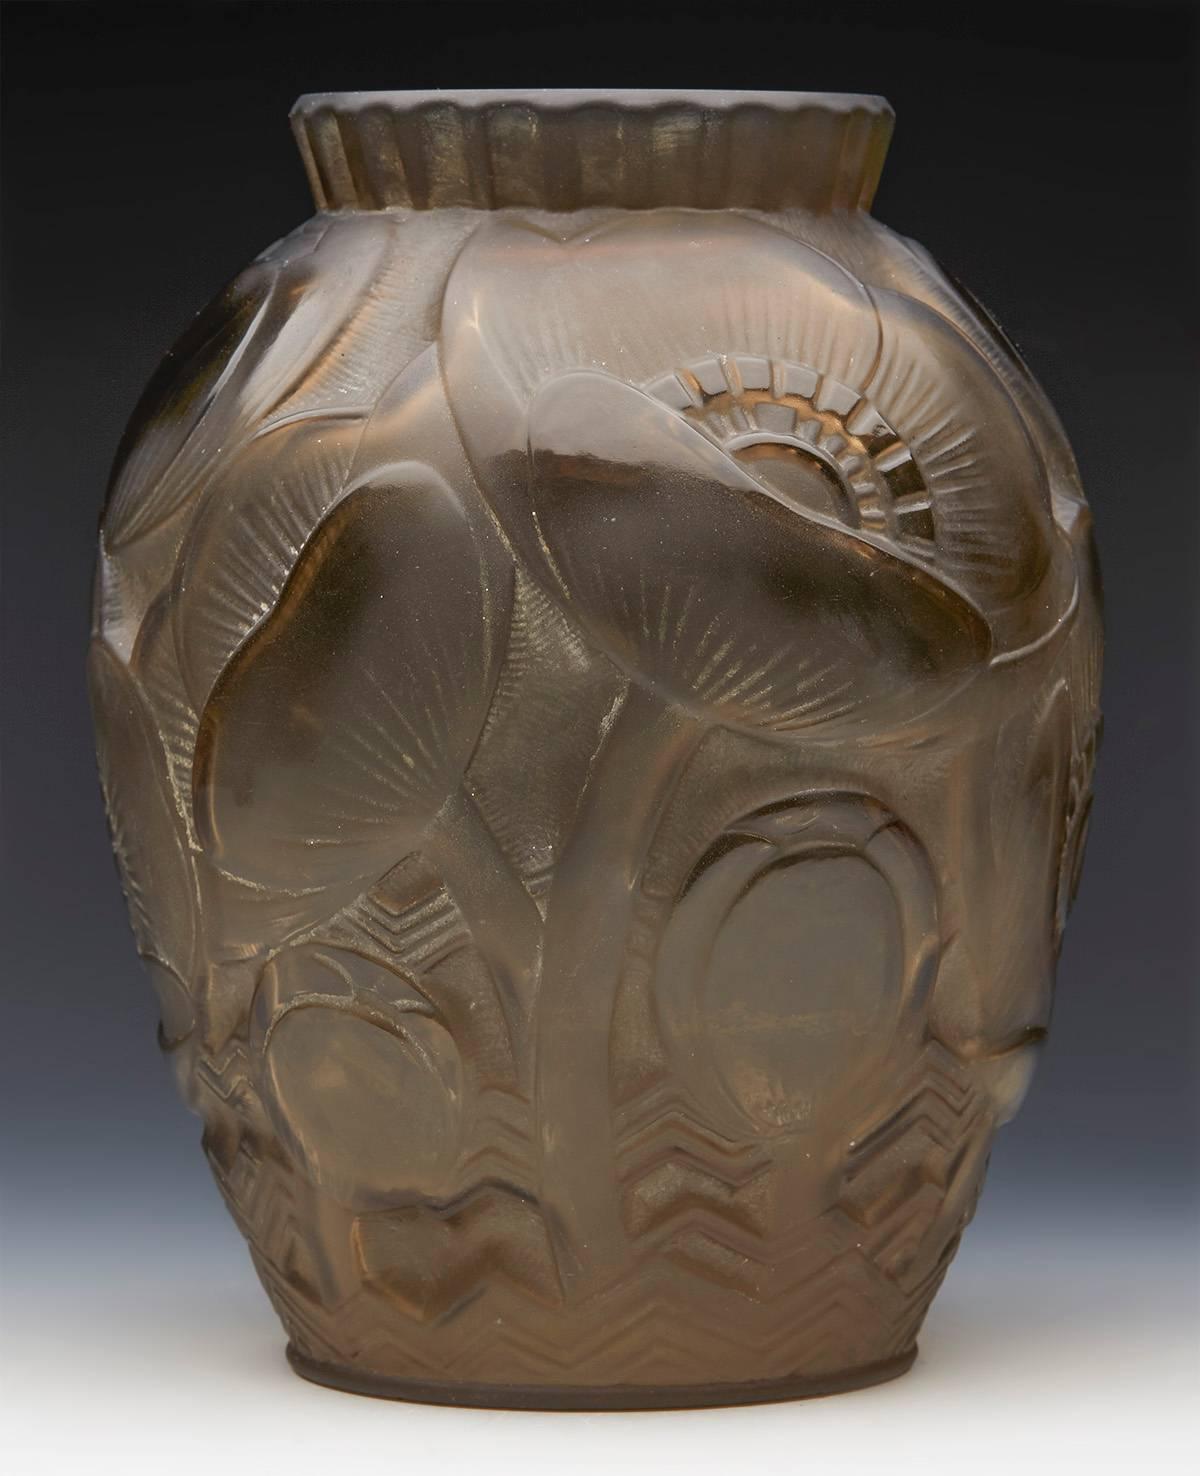 A fine Art Deco relief moulded smoked art glass vase with floral and seed pod designs by Pierre D'Avesn. The vase has a moulded makers mark to the base. For an identical style example see Christies Lot 456 sold on 13th October 2004 (sale no.